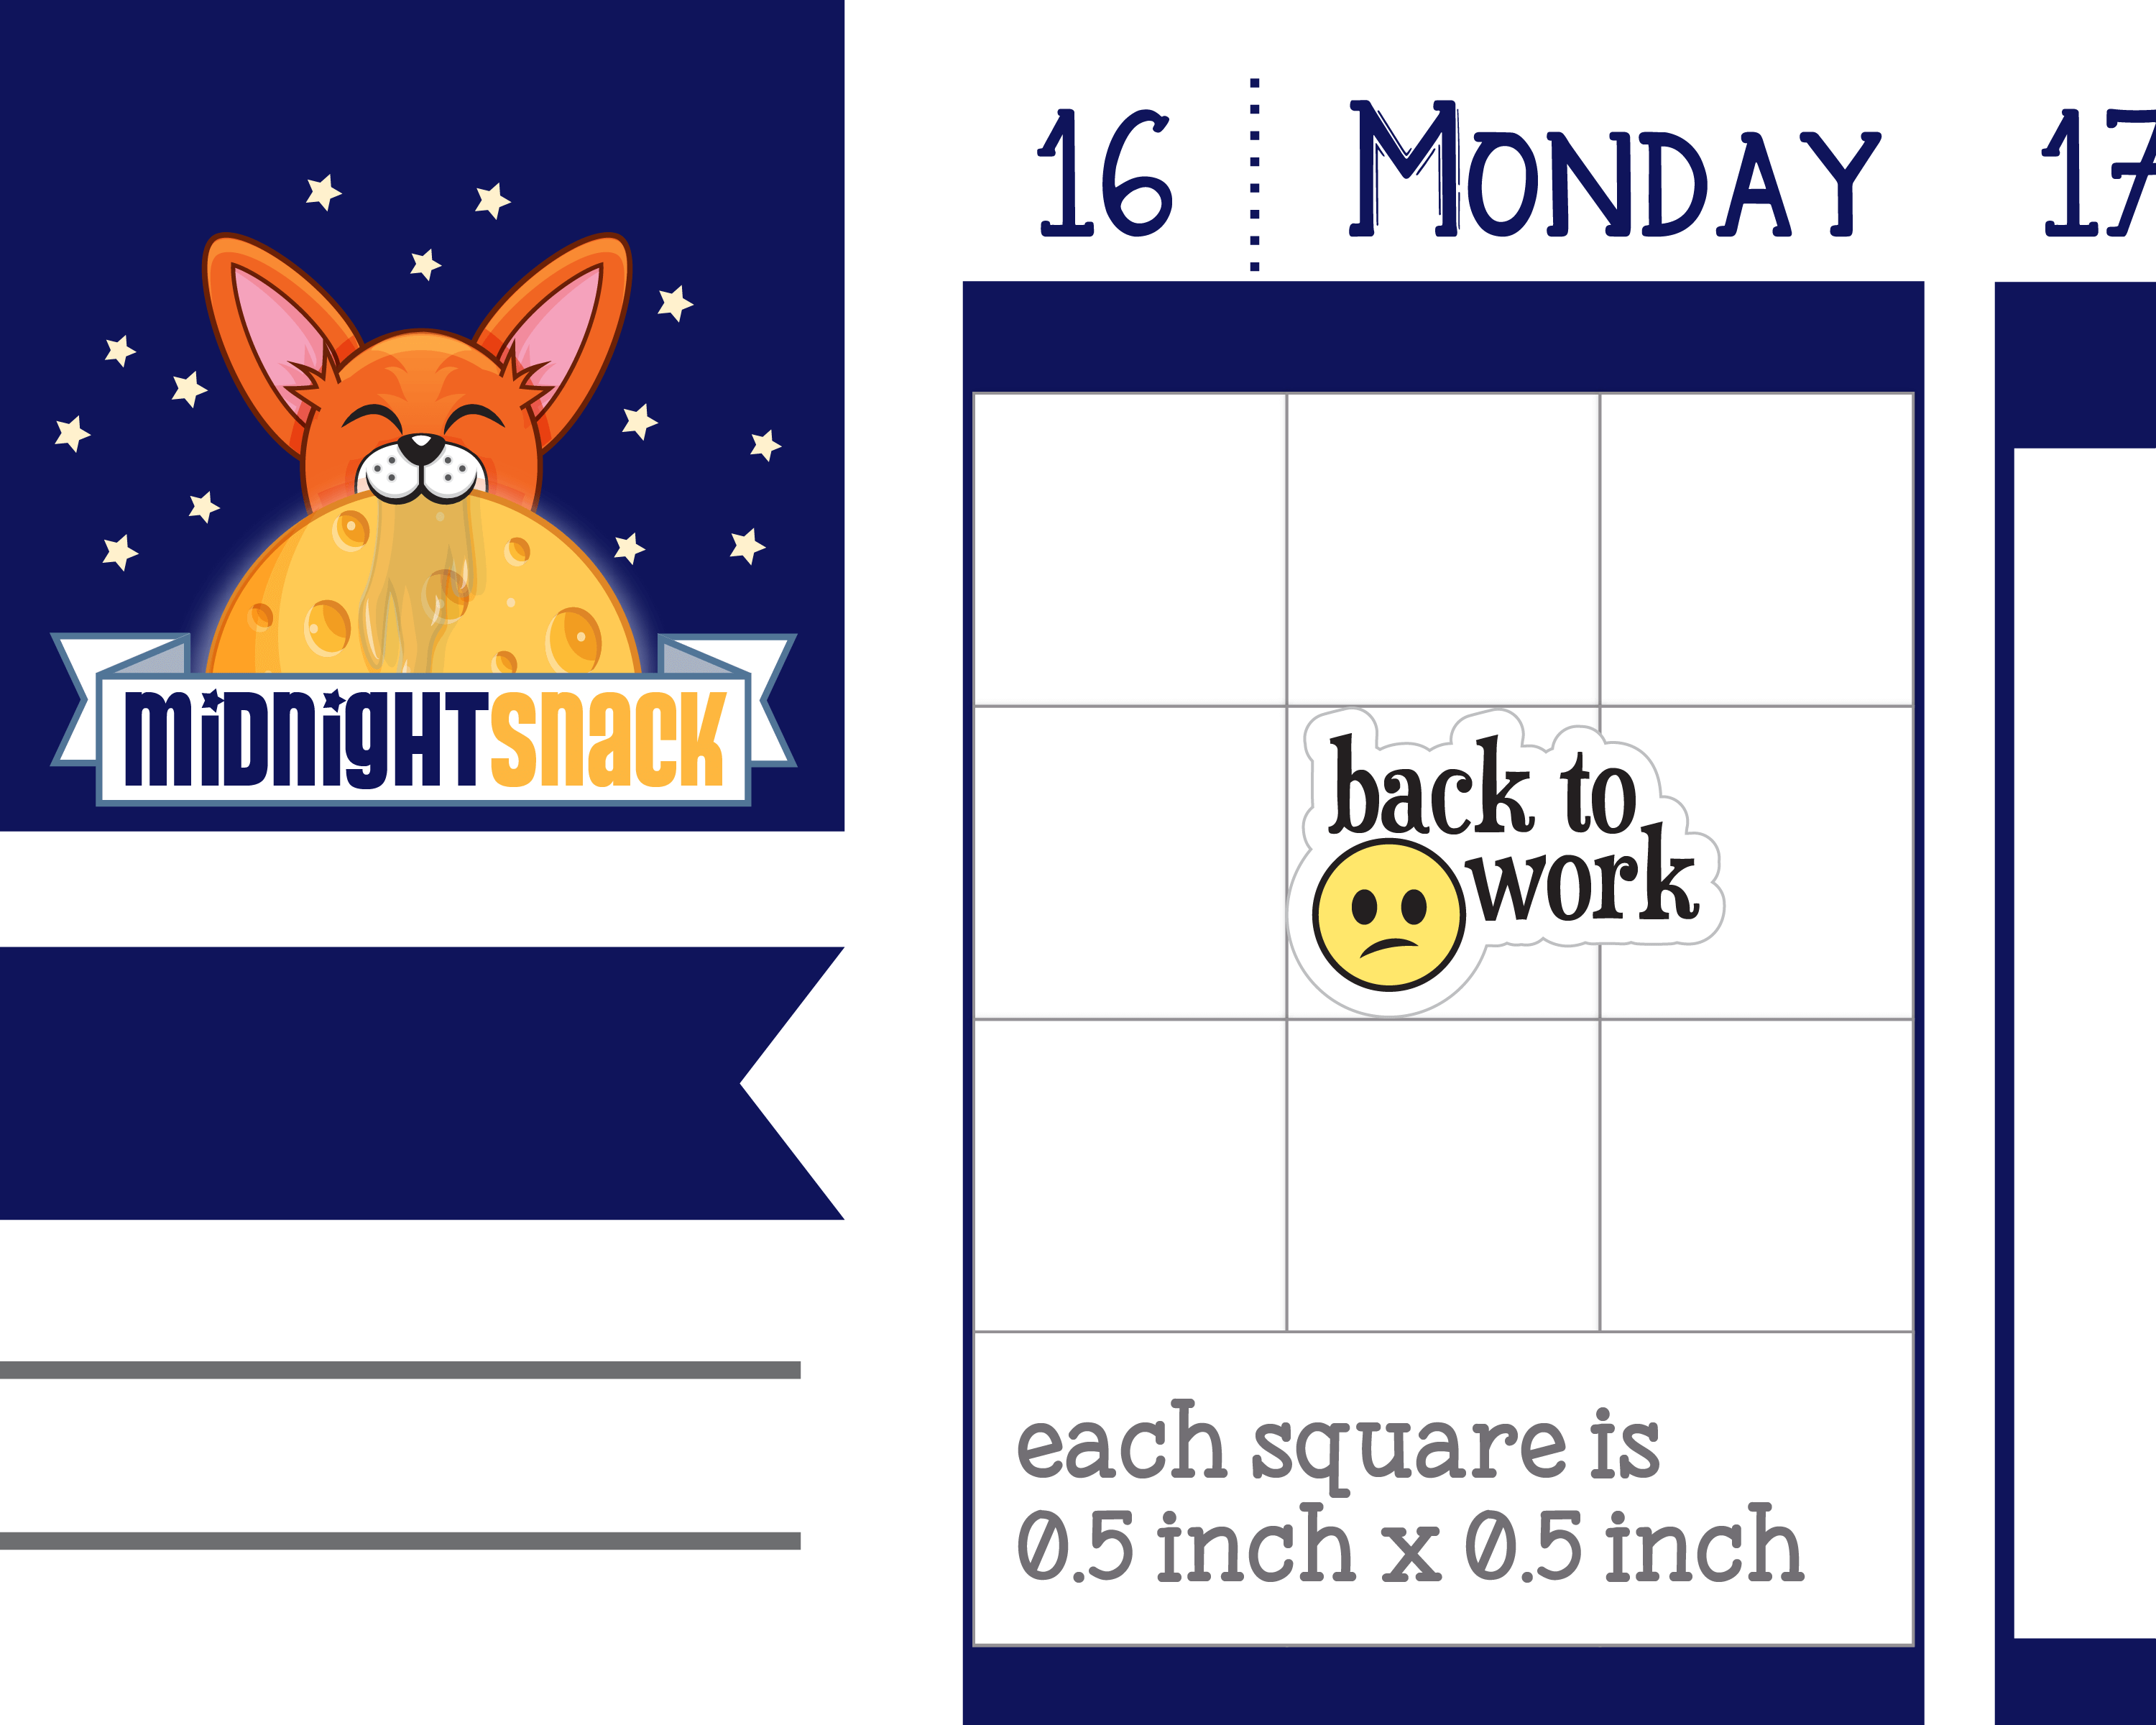 Back to Work Sad Face Icon: Work Day Planner Stickers: Midnight Snack Planner Stickers